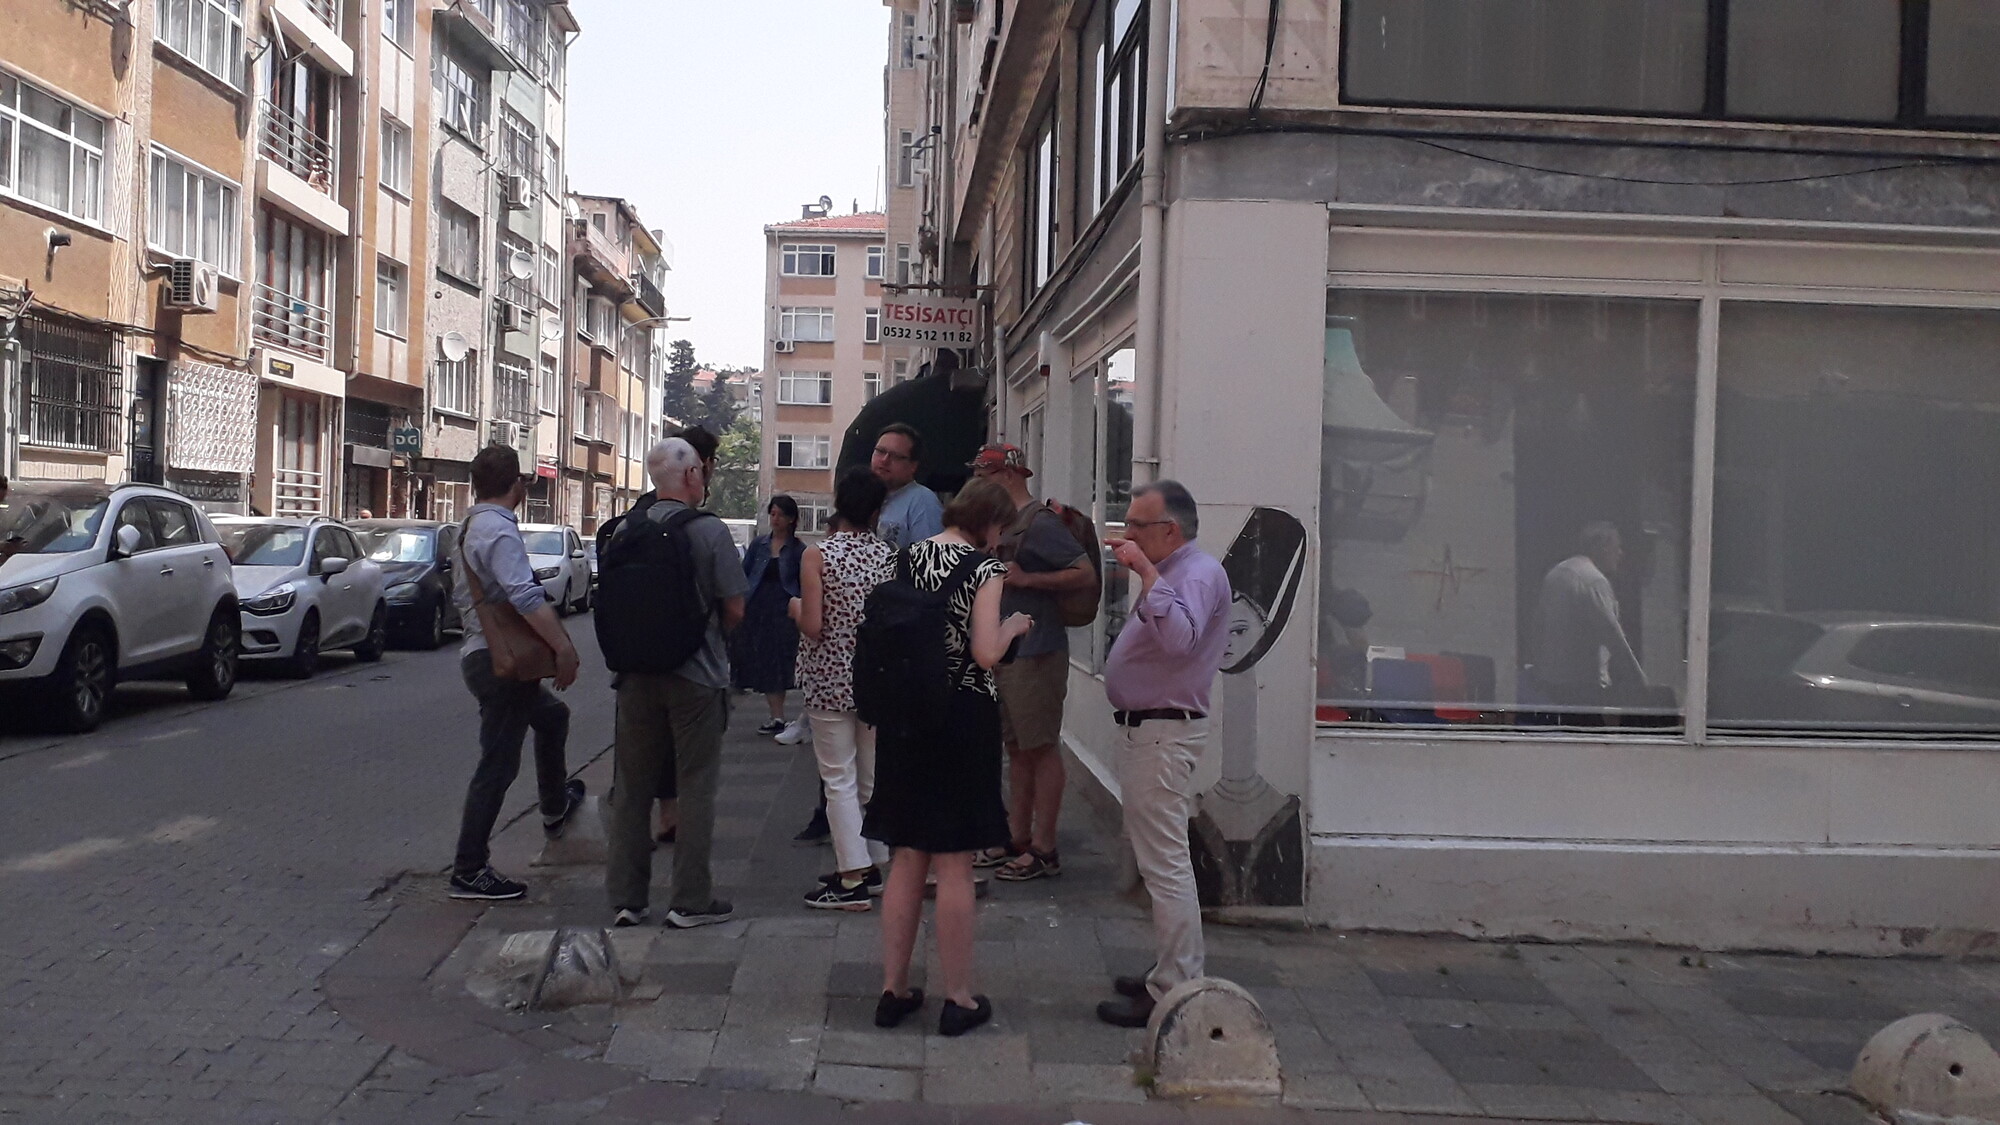 Several audience members gathered on the street discussing the show with one another.